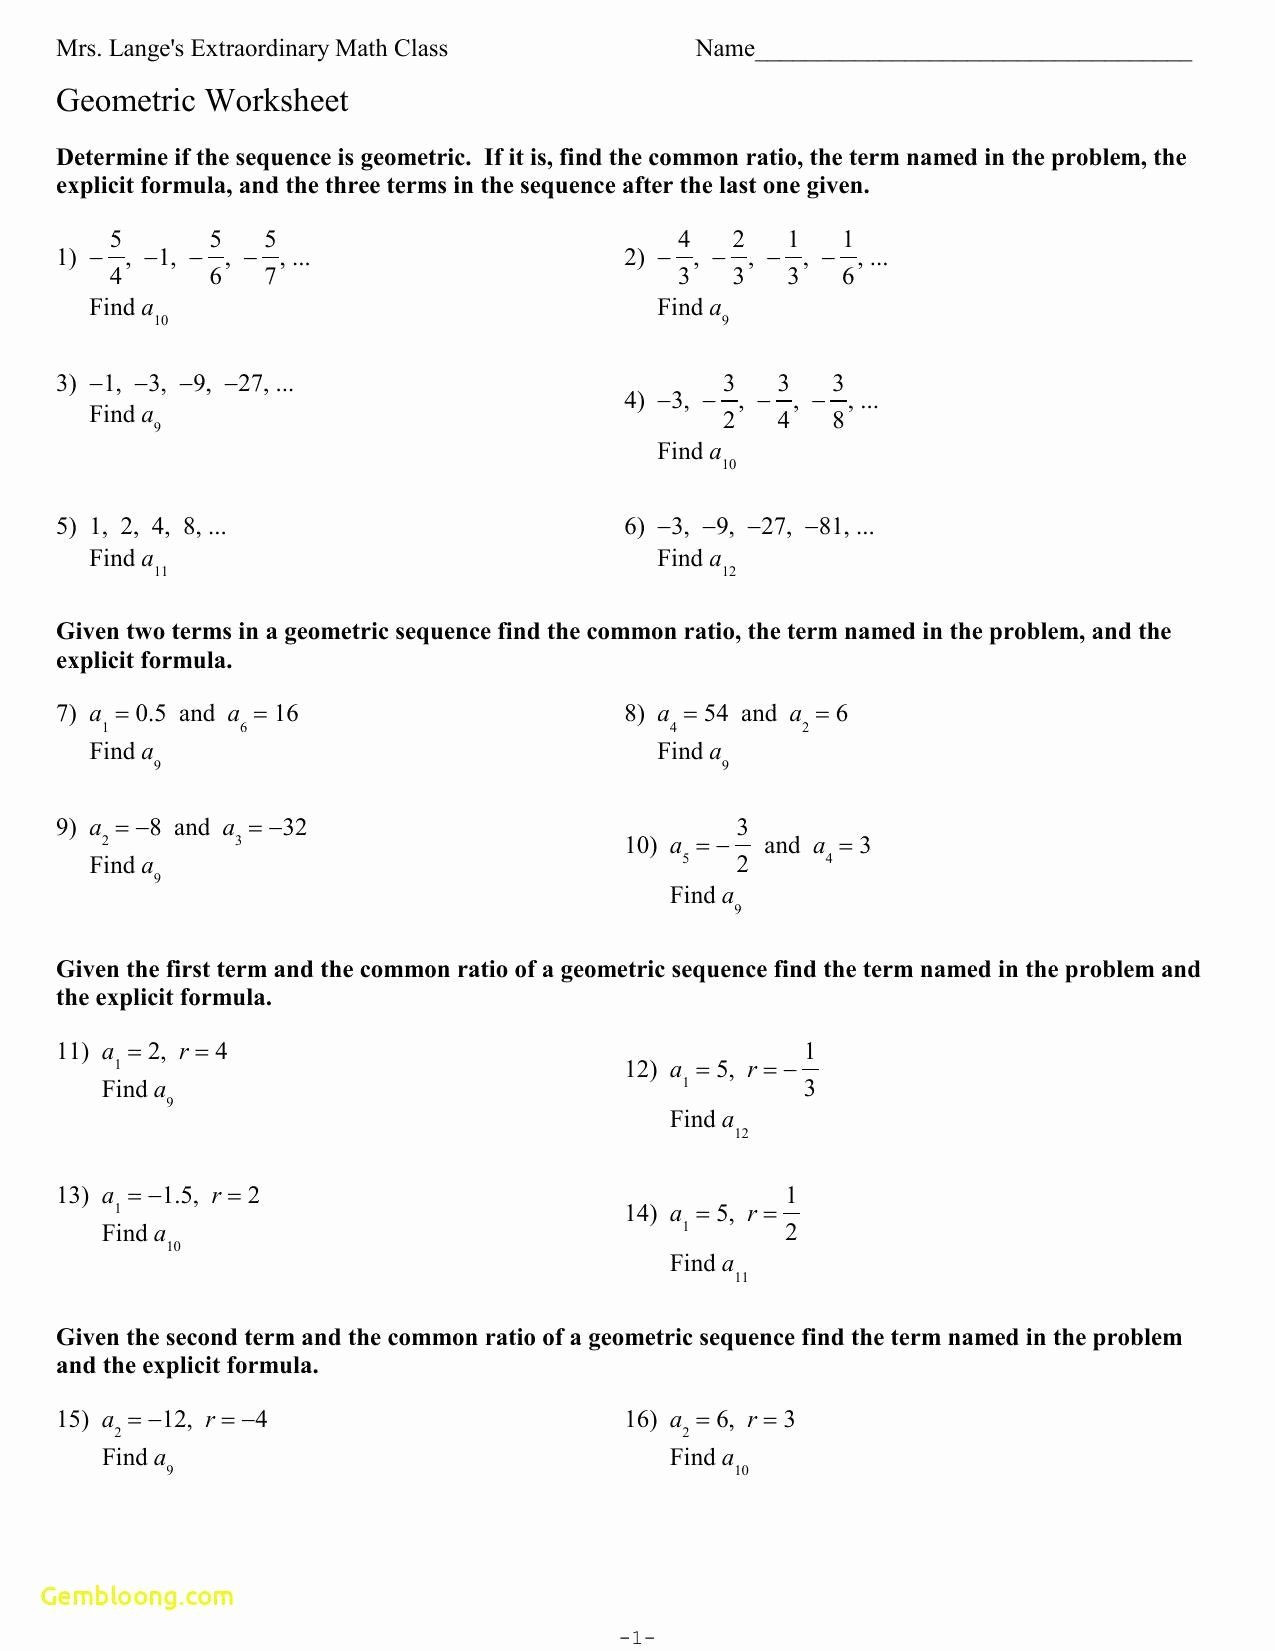 Geometric Sequence and Series Worksheet 50 Arithmetic Sequence Worksheet Answers In 2020 with